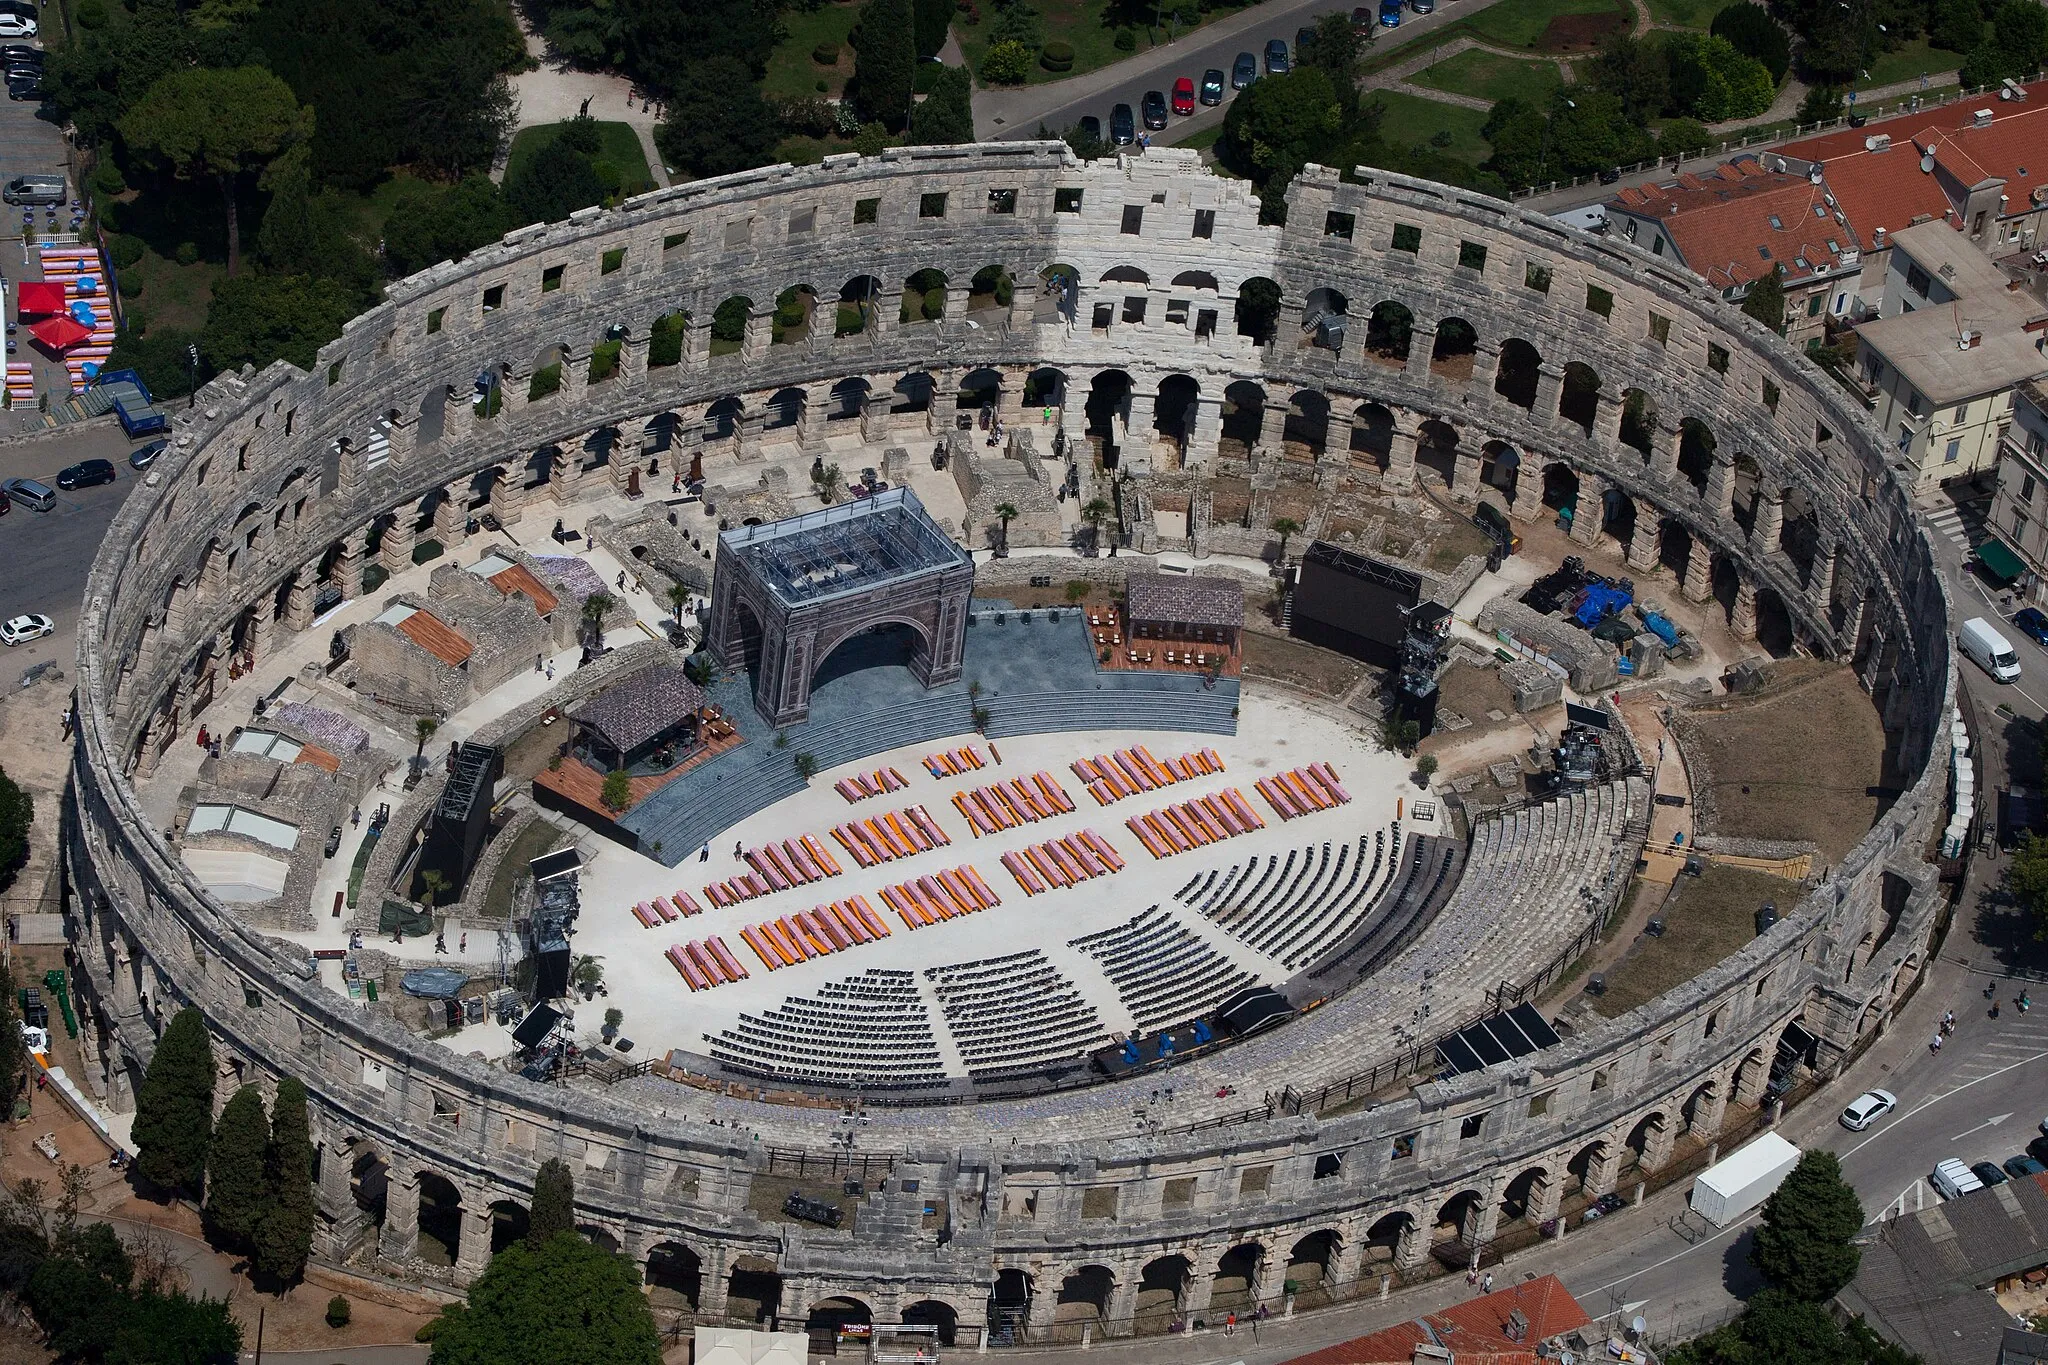 Photo showing: The new old amphitheater in Pula, Istria. Built around 0 AD/BC and one of the largest remaining in the world. https://en.wikipedia.org/wiki/Pula_Arena